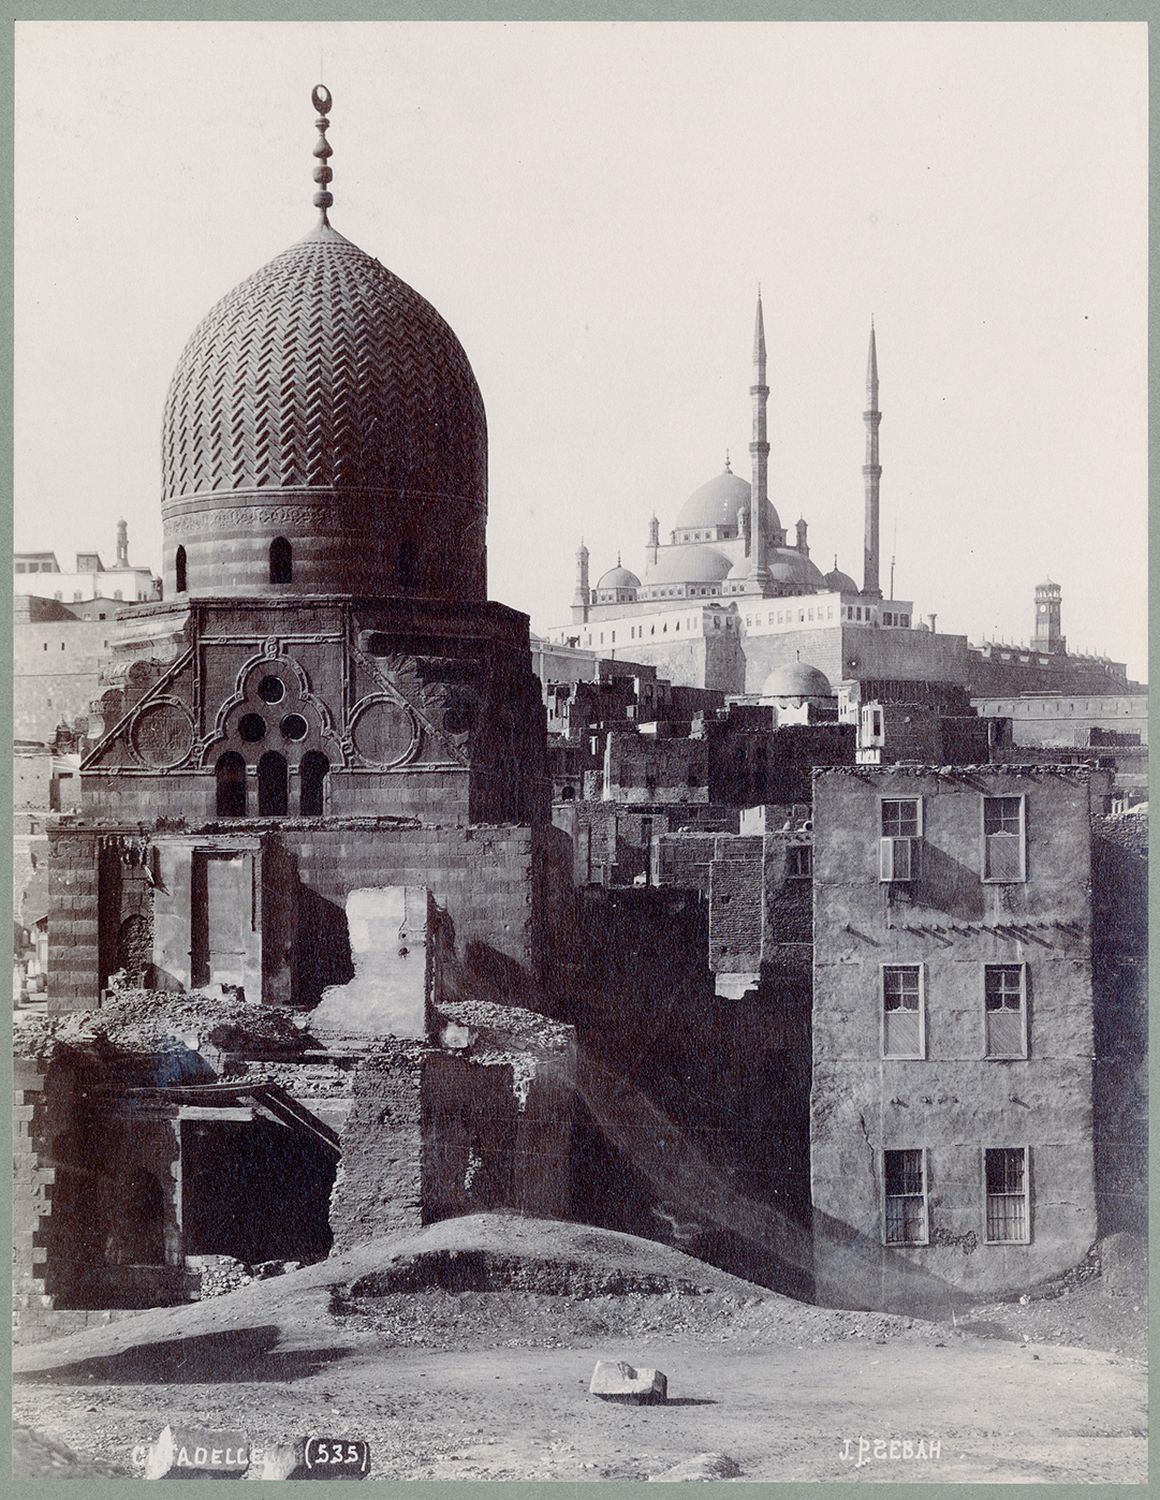 View of mausoleum before restoration. Muhammad Ali Mosque and Citadel visible in background.